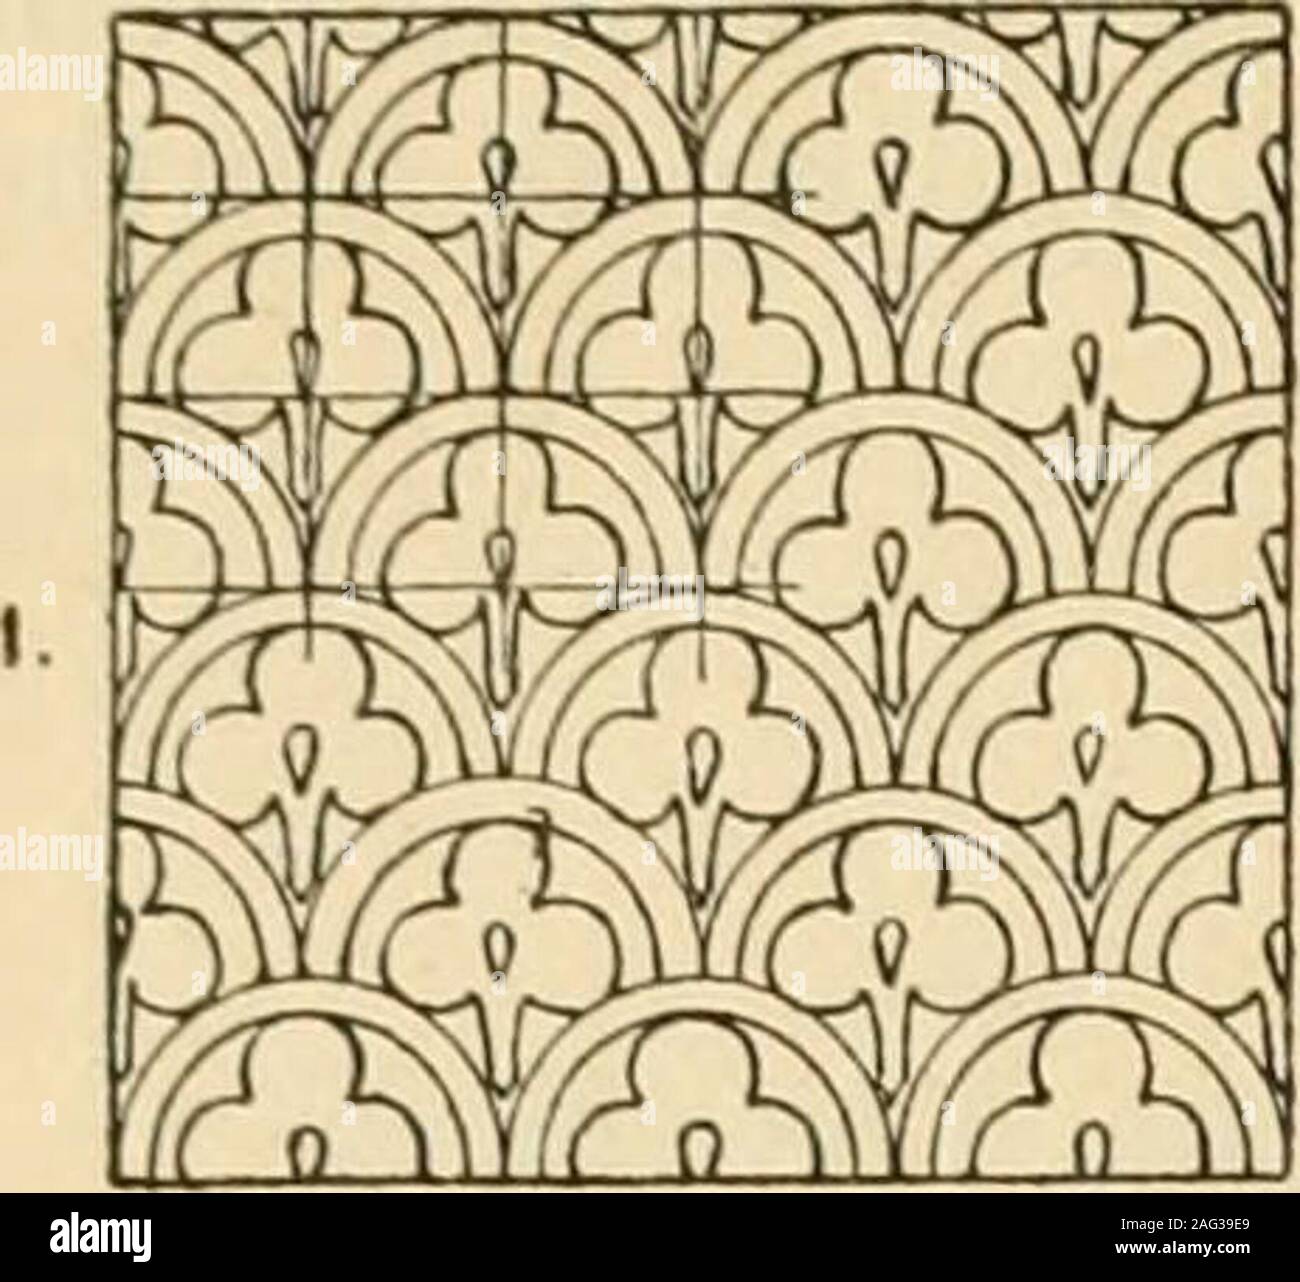 . Handbook of ornament; a grammar of art, industrial and architectural designing in all its branches, for practical as well as theoretical use. steel, by being hammered intoengraved hollows which have been undercut with a roughened ground.The processes of Enamelling are very various. In the cloison process:bent bands or fillets of metal (cloisons) are soldered-on to the metalground, and the hollows or cells thus formed are filled vpith pulve-rised glass paste (glass coloured with metallic oxides) which are thenvitrified by heat. In the sunk or champ-lev6 process: the hollowsin the metallic gro Stock Photo